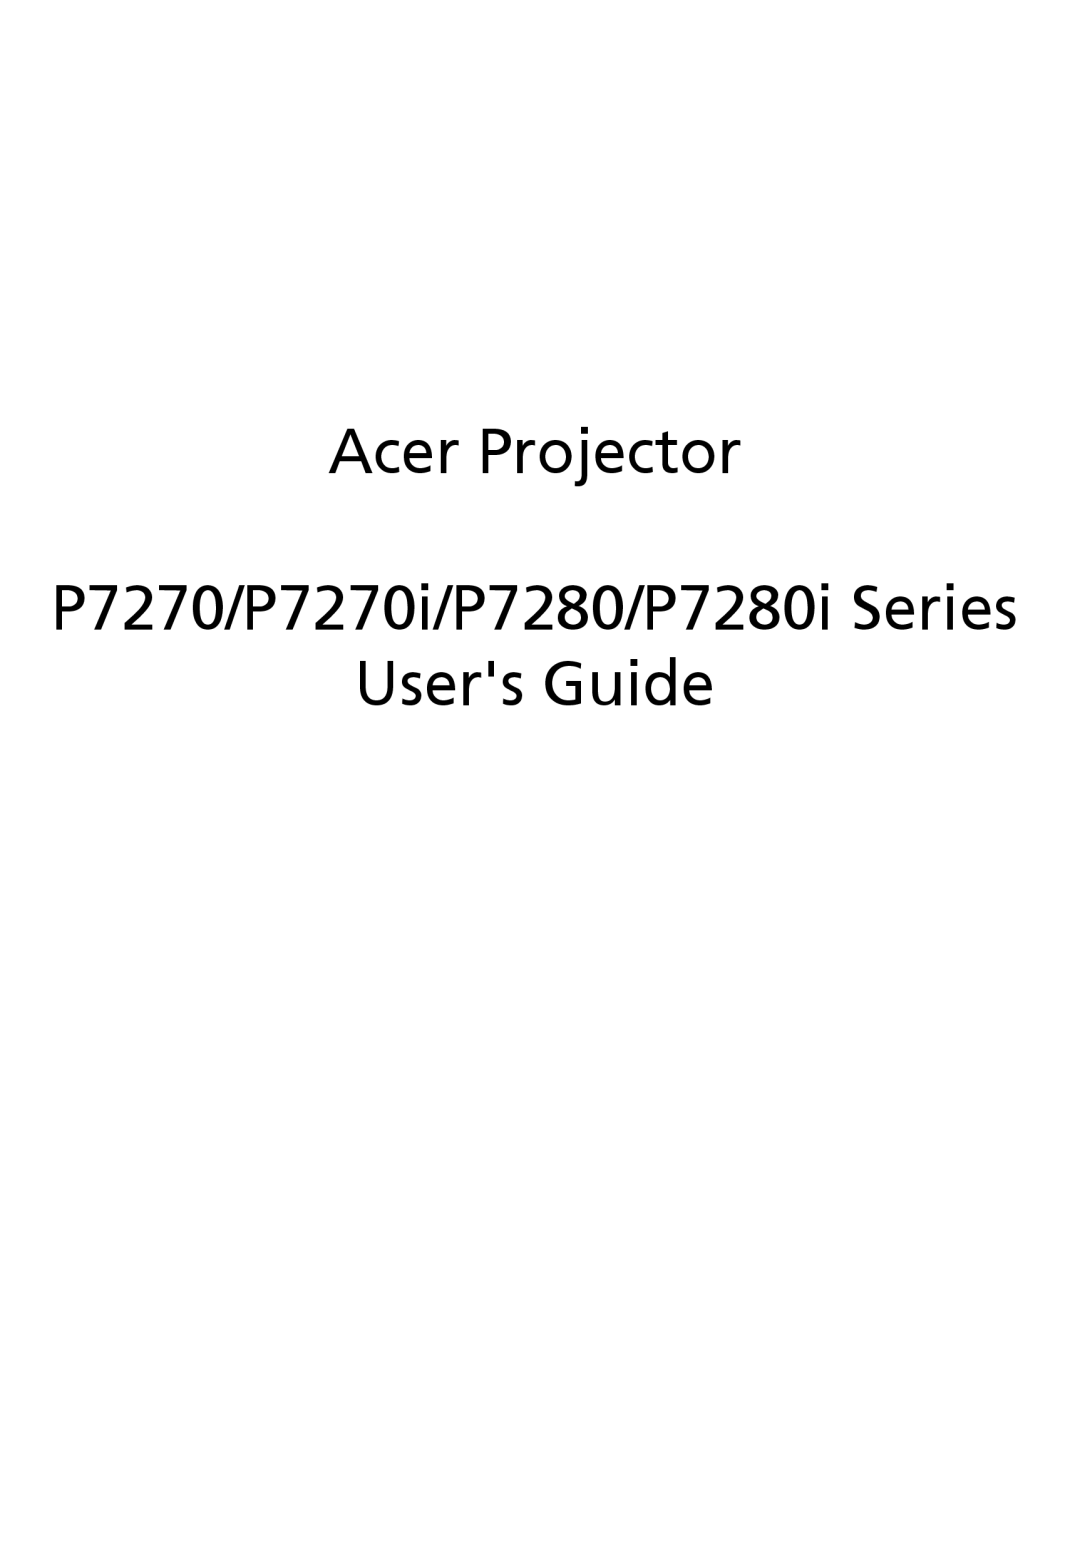 Acer manual Acer Projector P7270/P7270i/P7280/P7280i Series Users Guide 